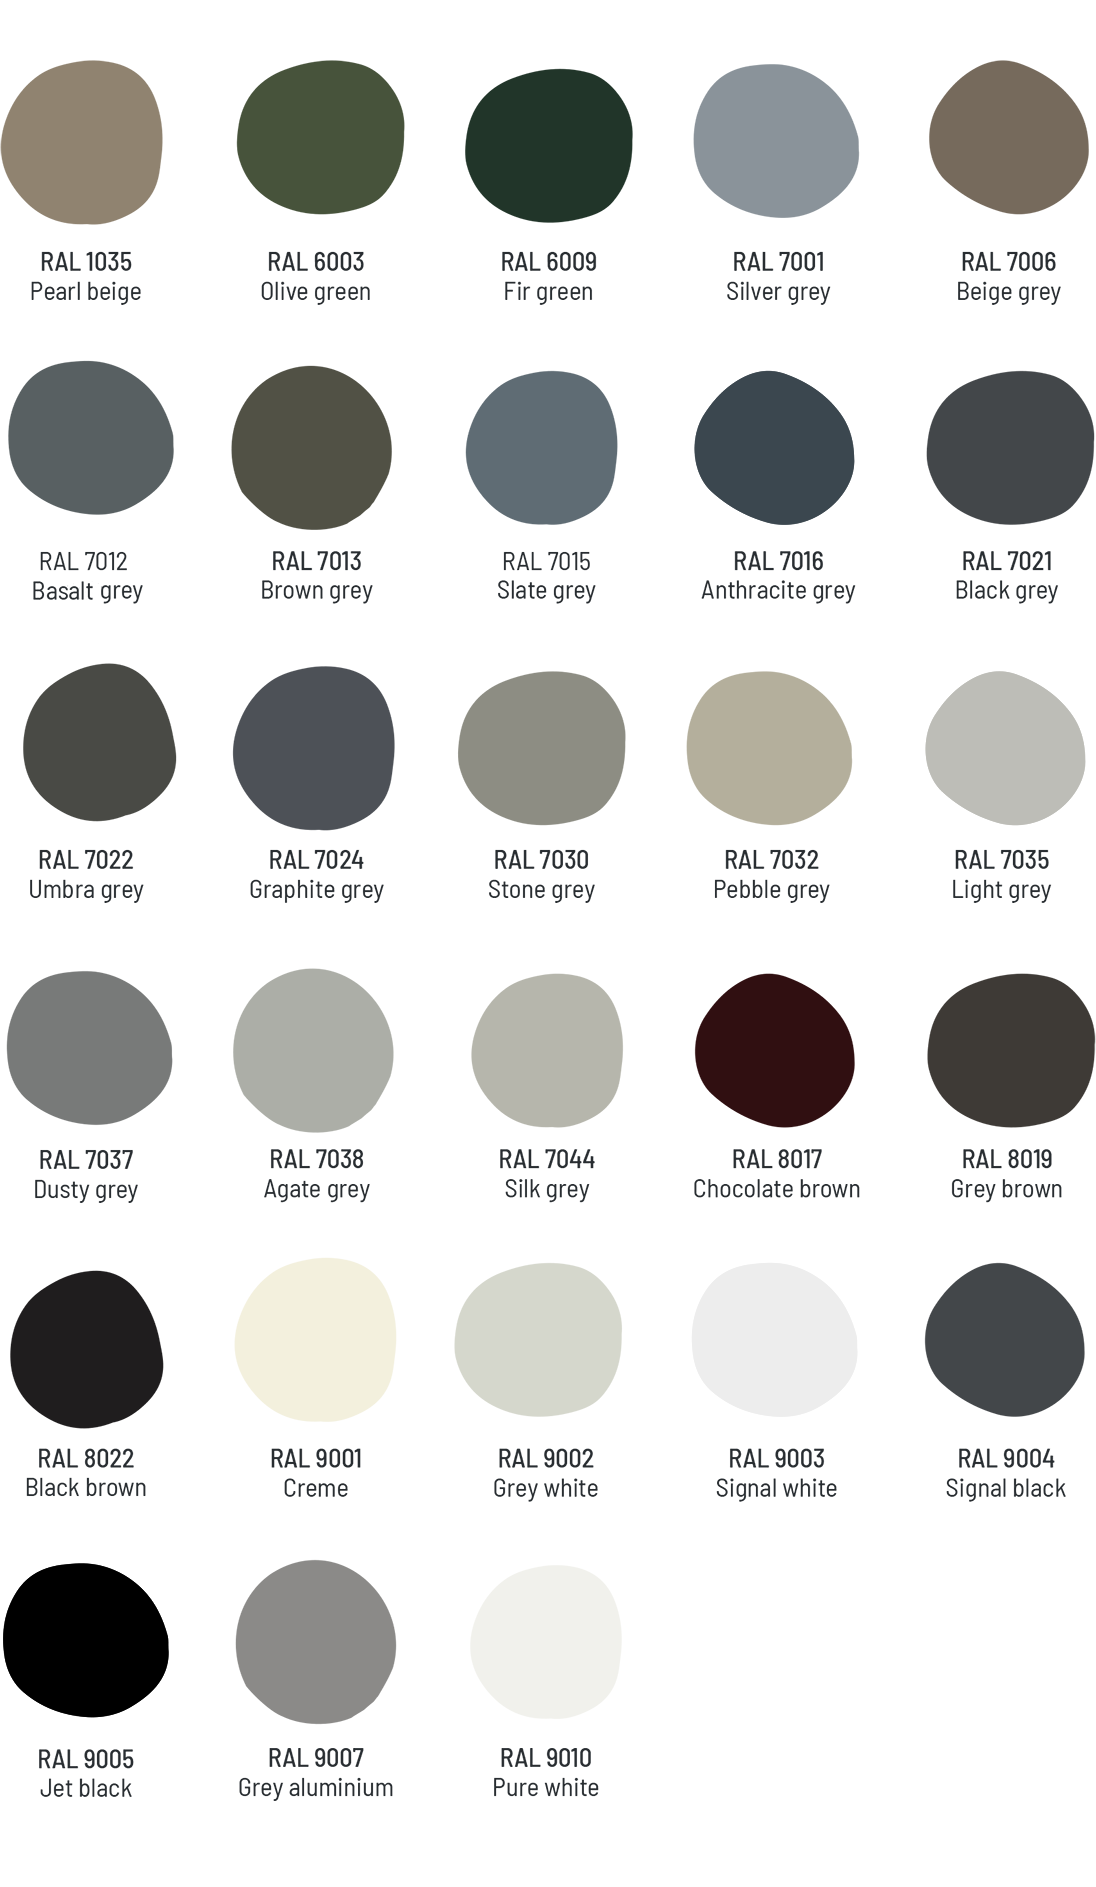 Standard RAL Colours